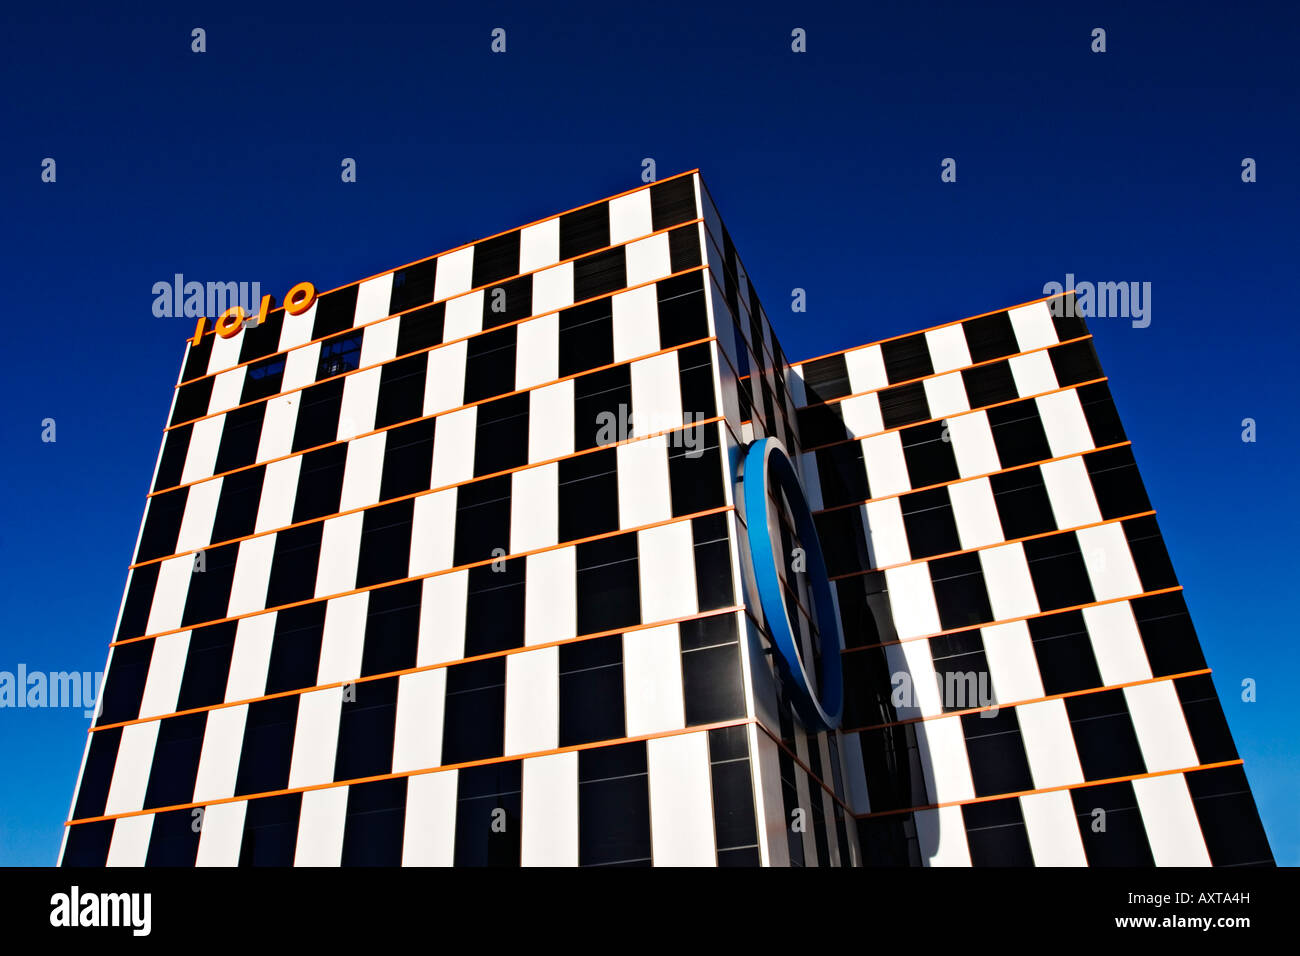 Architecture / Architectural detail of a modern office building in Melbourne Victoria Australia. Stock Photo